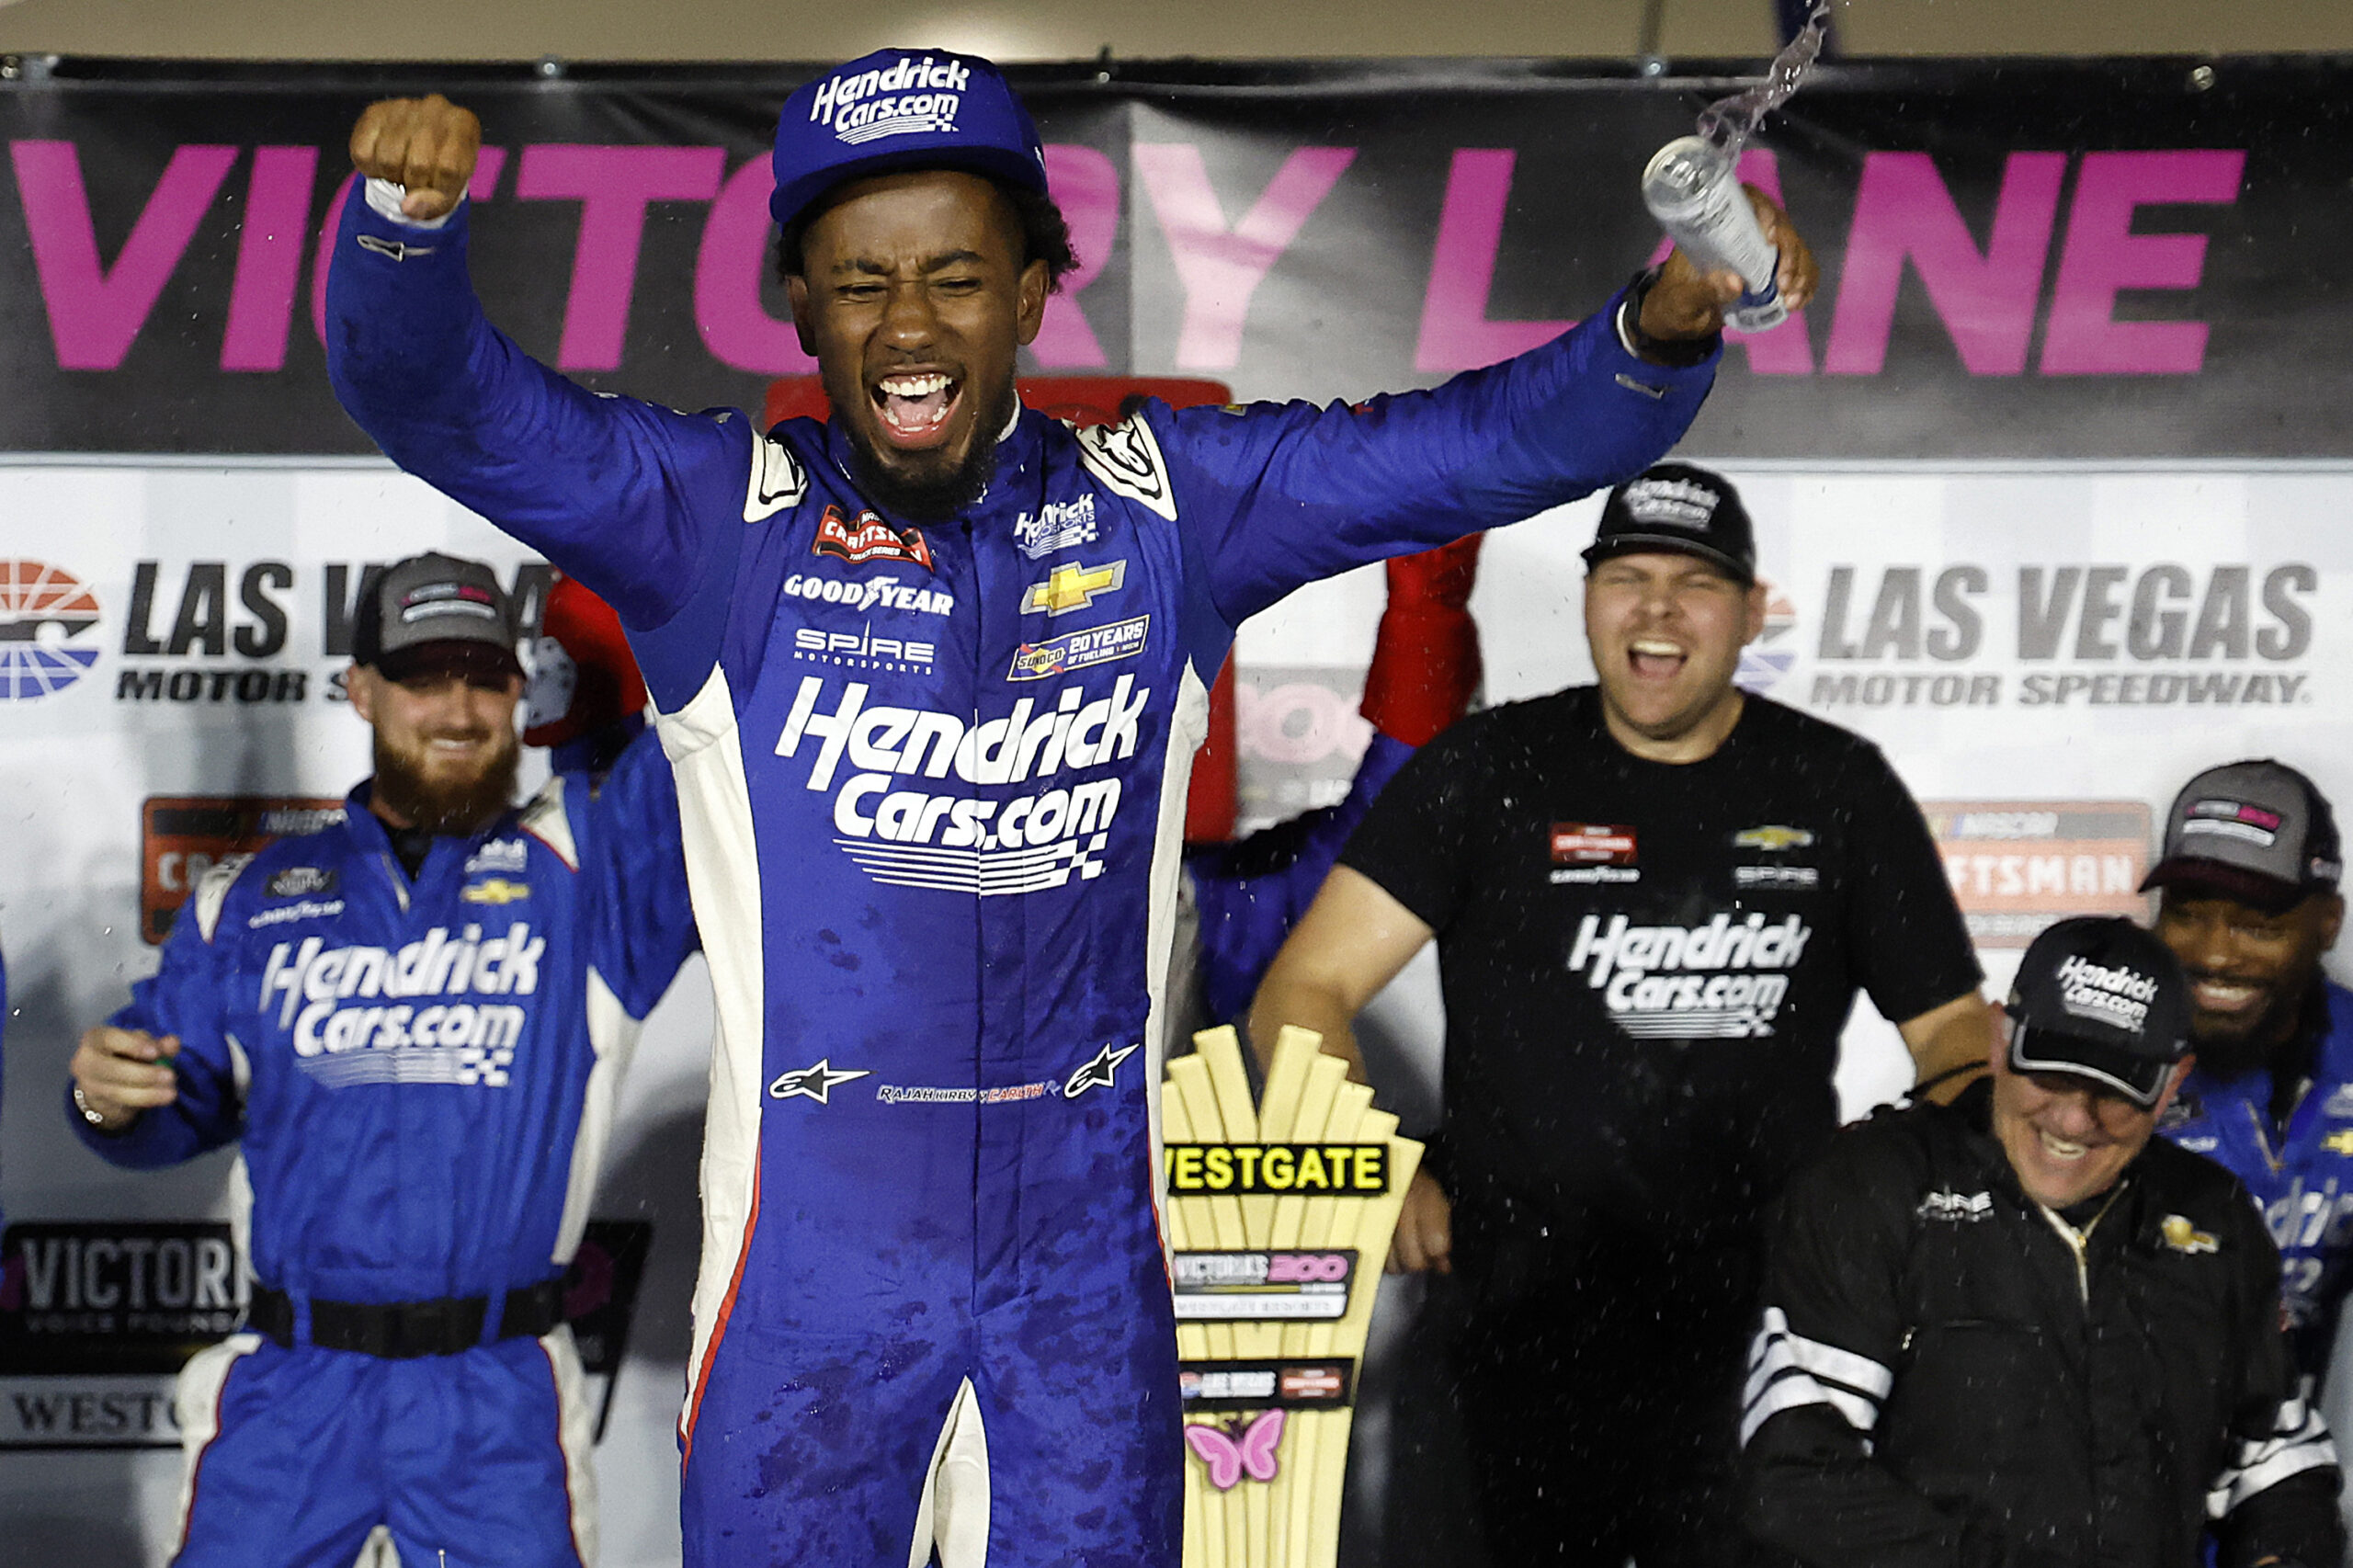 Rajah Caruth, driver of the #71 HendrickCars.com Chevrolet, celebrates in victory lane after winning the NASCAR Craftsman Truck Series Victoria's Voice Foundation 200 at Las Vegas Motor Speedway on March 01, 2024 in Las Vegas, Nevada. (Photo by Chris Graythen/Getty Images)